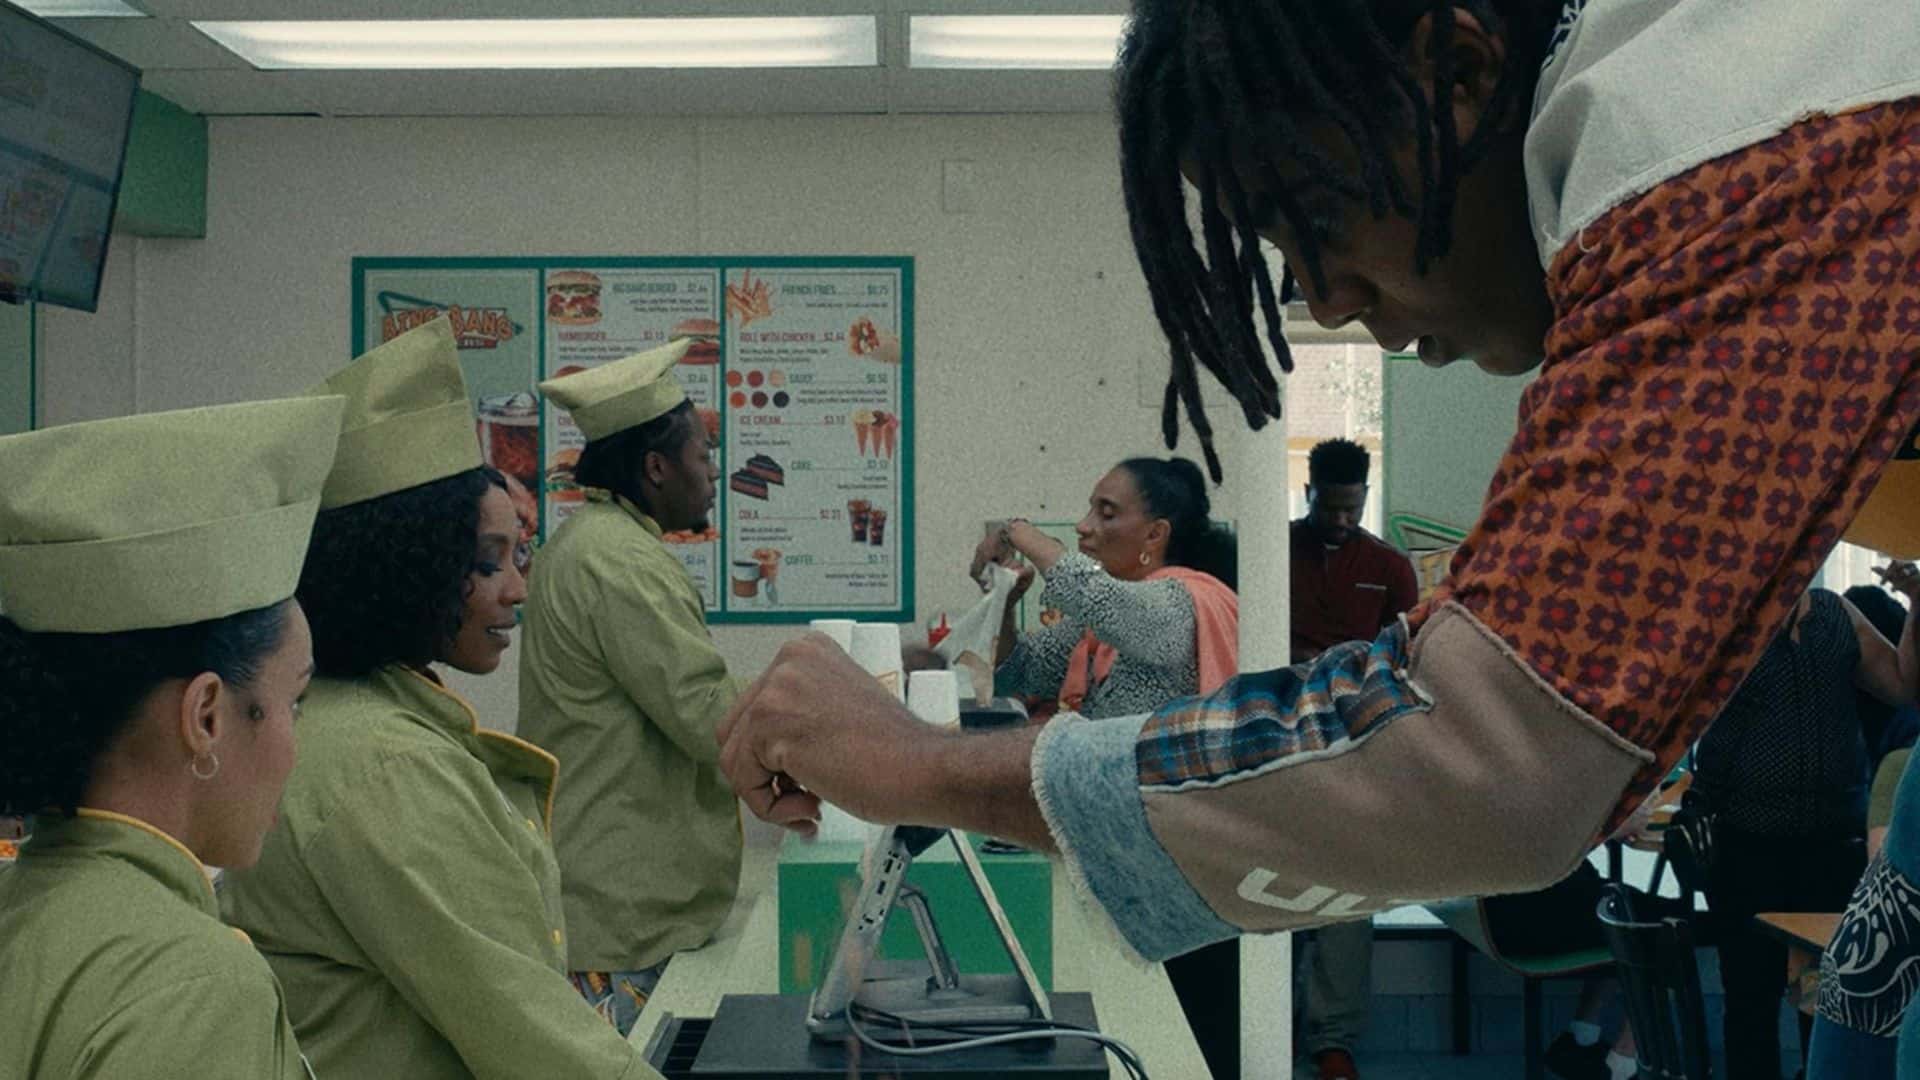 Olivia Washington takes payment from Jharrel Jerome over a fast food counter in this image from Amazon Studios.